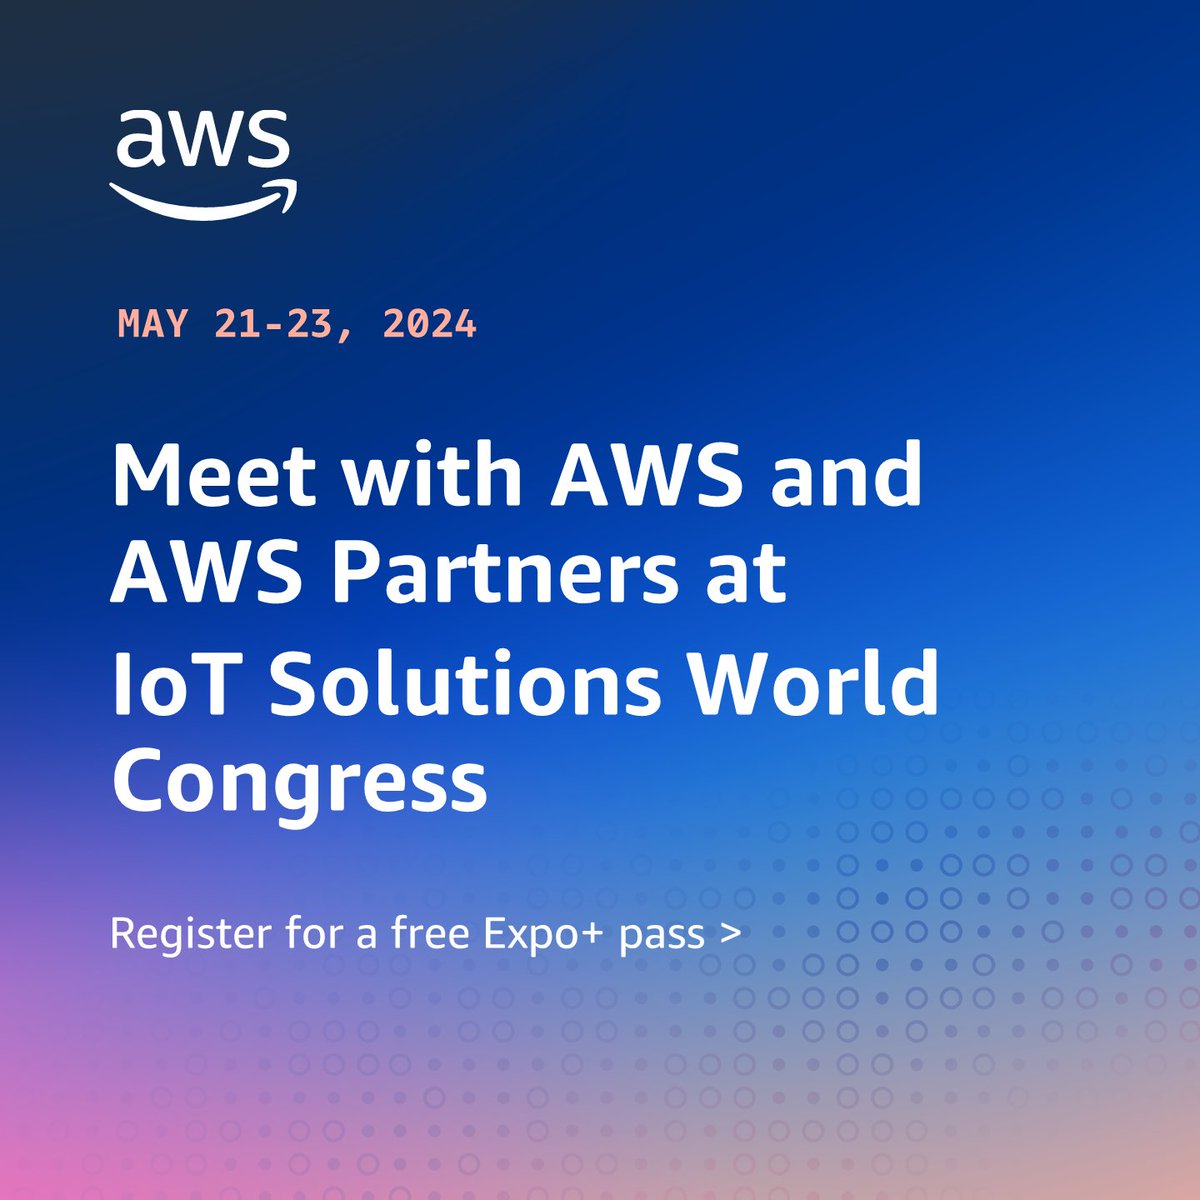 #IoT Solutions World Congress is almost here! 🌎 Learn more about AWS’ presence & register to recieve an Expo+ pass on us: 🎟️ go.aws/3y5SD3K Visit #AWS at #IoTSWC24 to experience #AWPartners solution demos, in-booth sessions, & so much more! #generativeAI